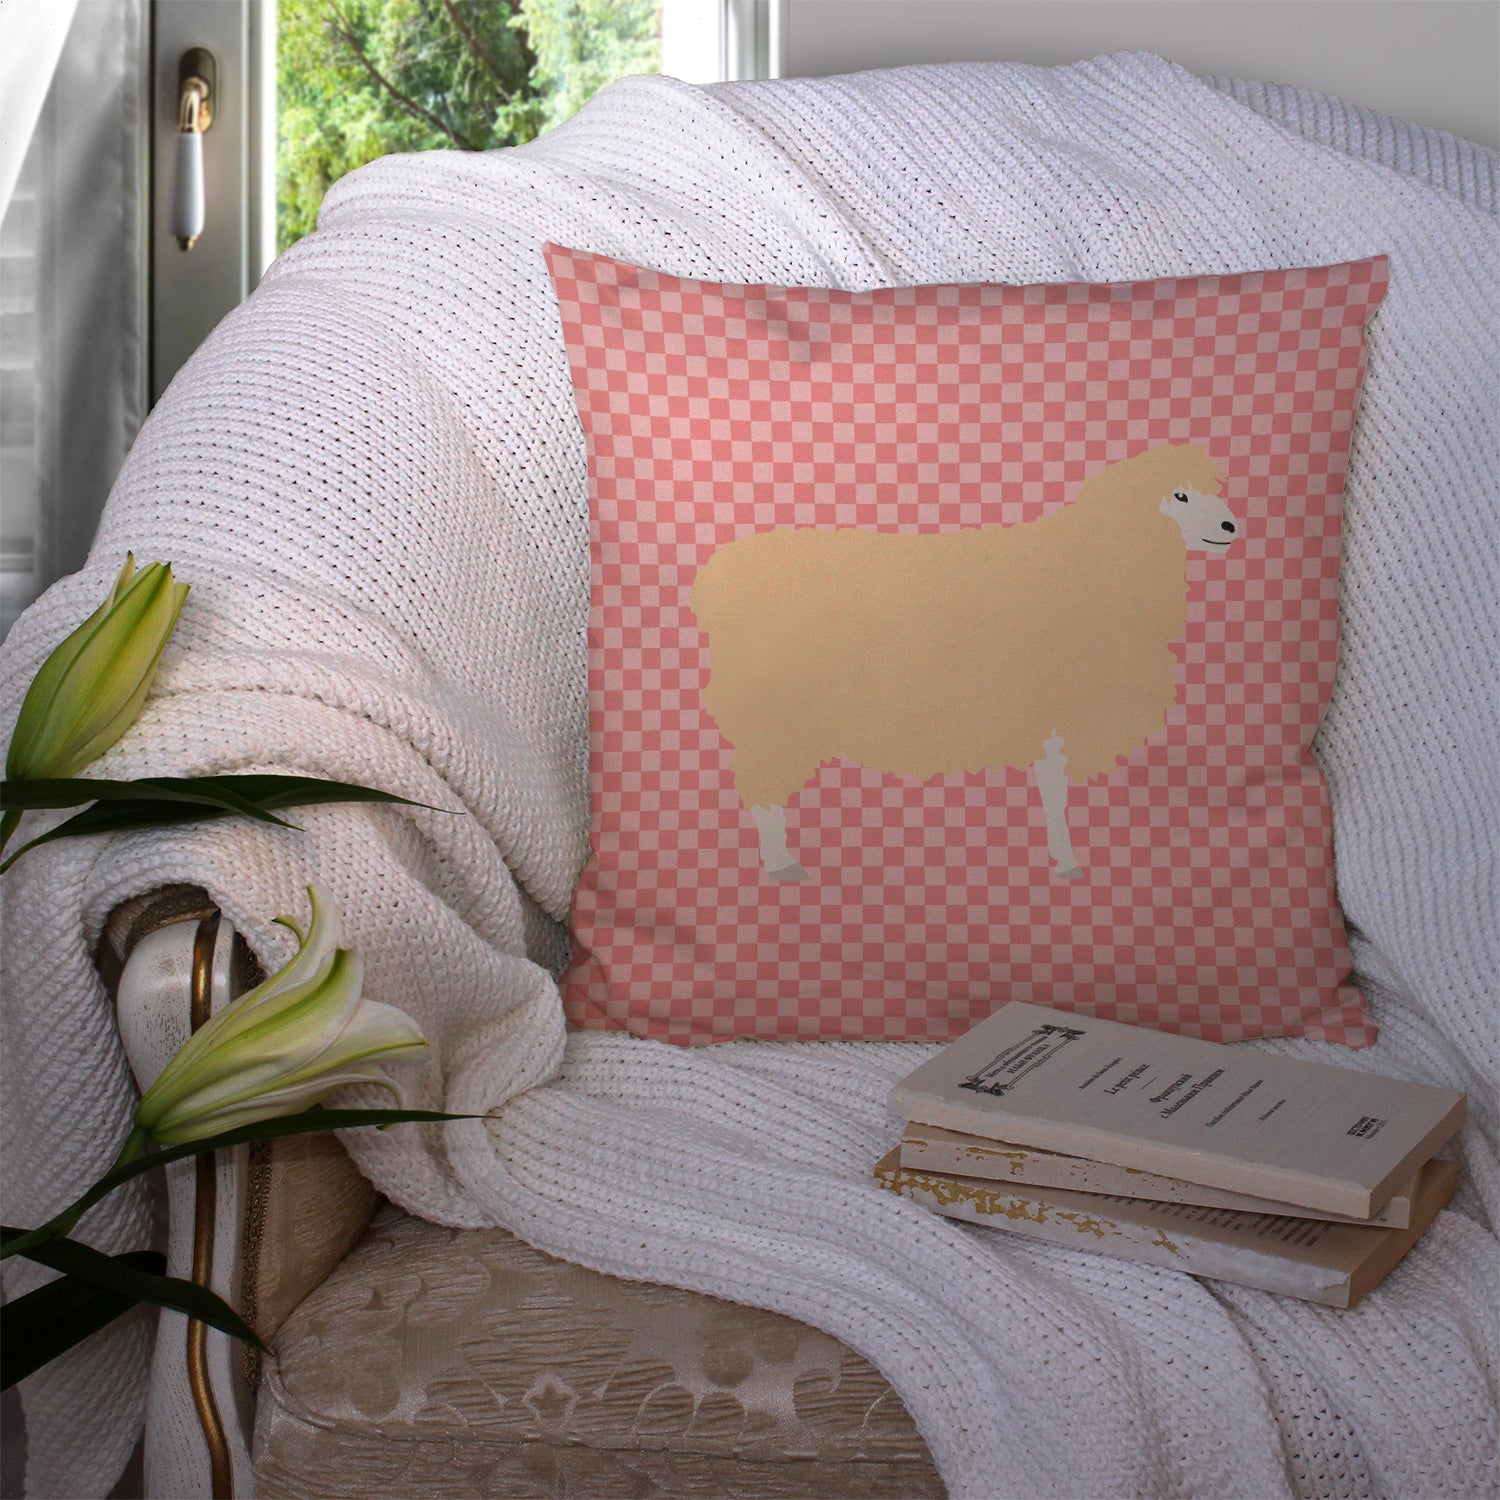 English Leicester Longwool Sheep Pink Check Fabric Decorative Pillow BB7974PW1414 - the-store.com